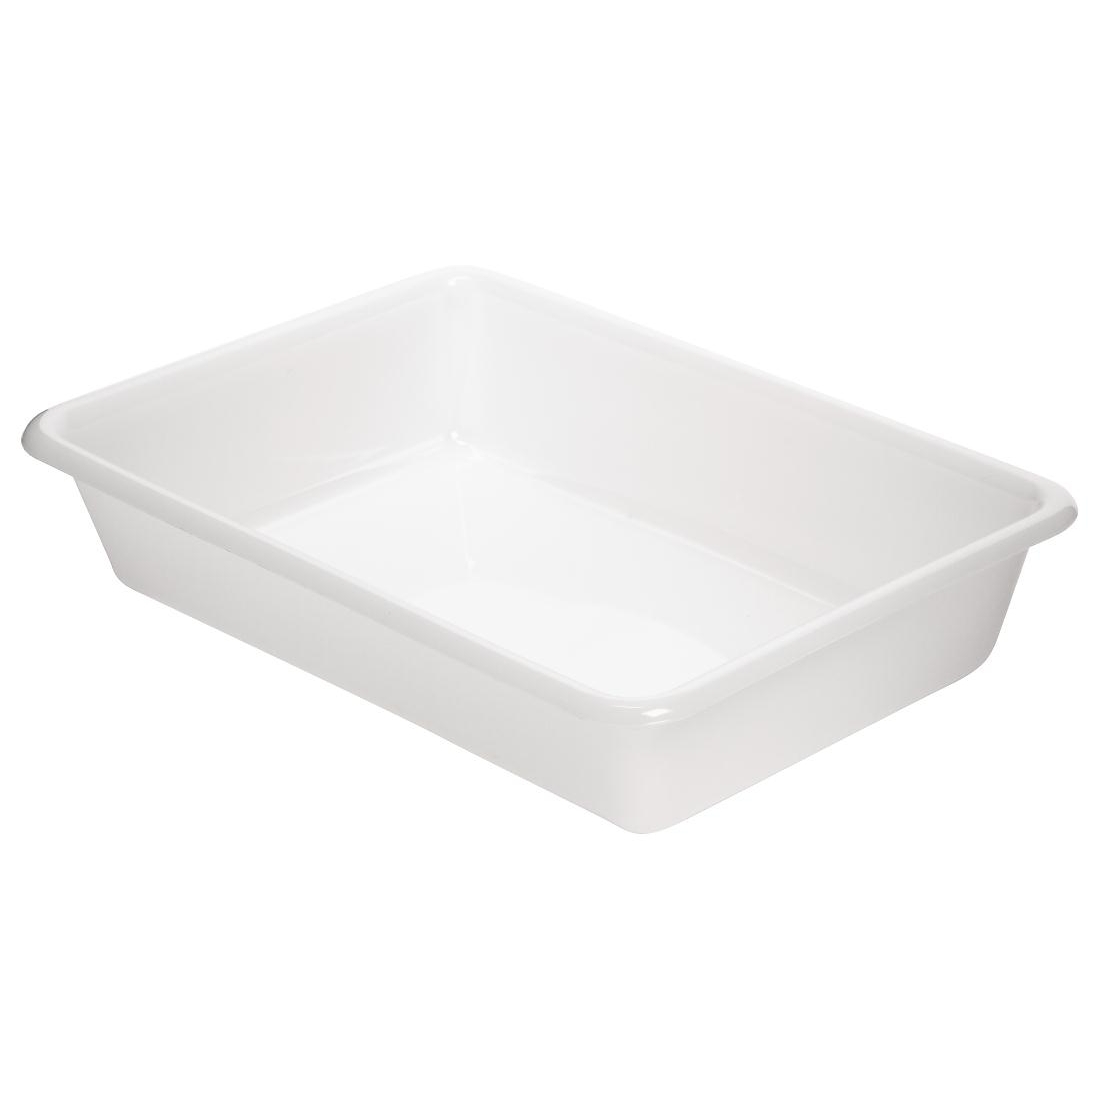 Araven Shallow Food Storage Tray 13in